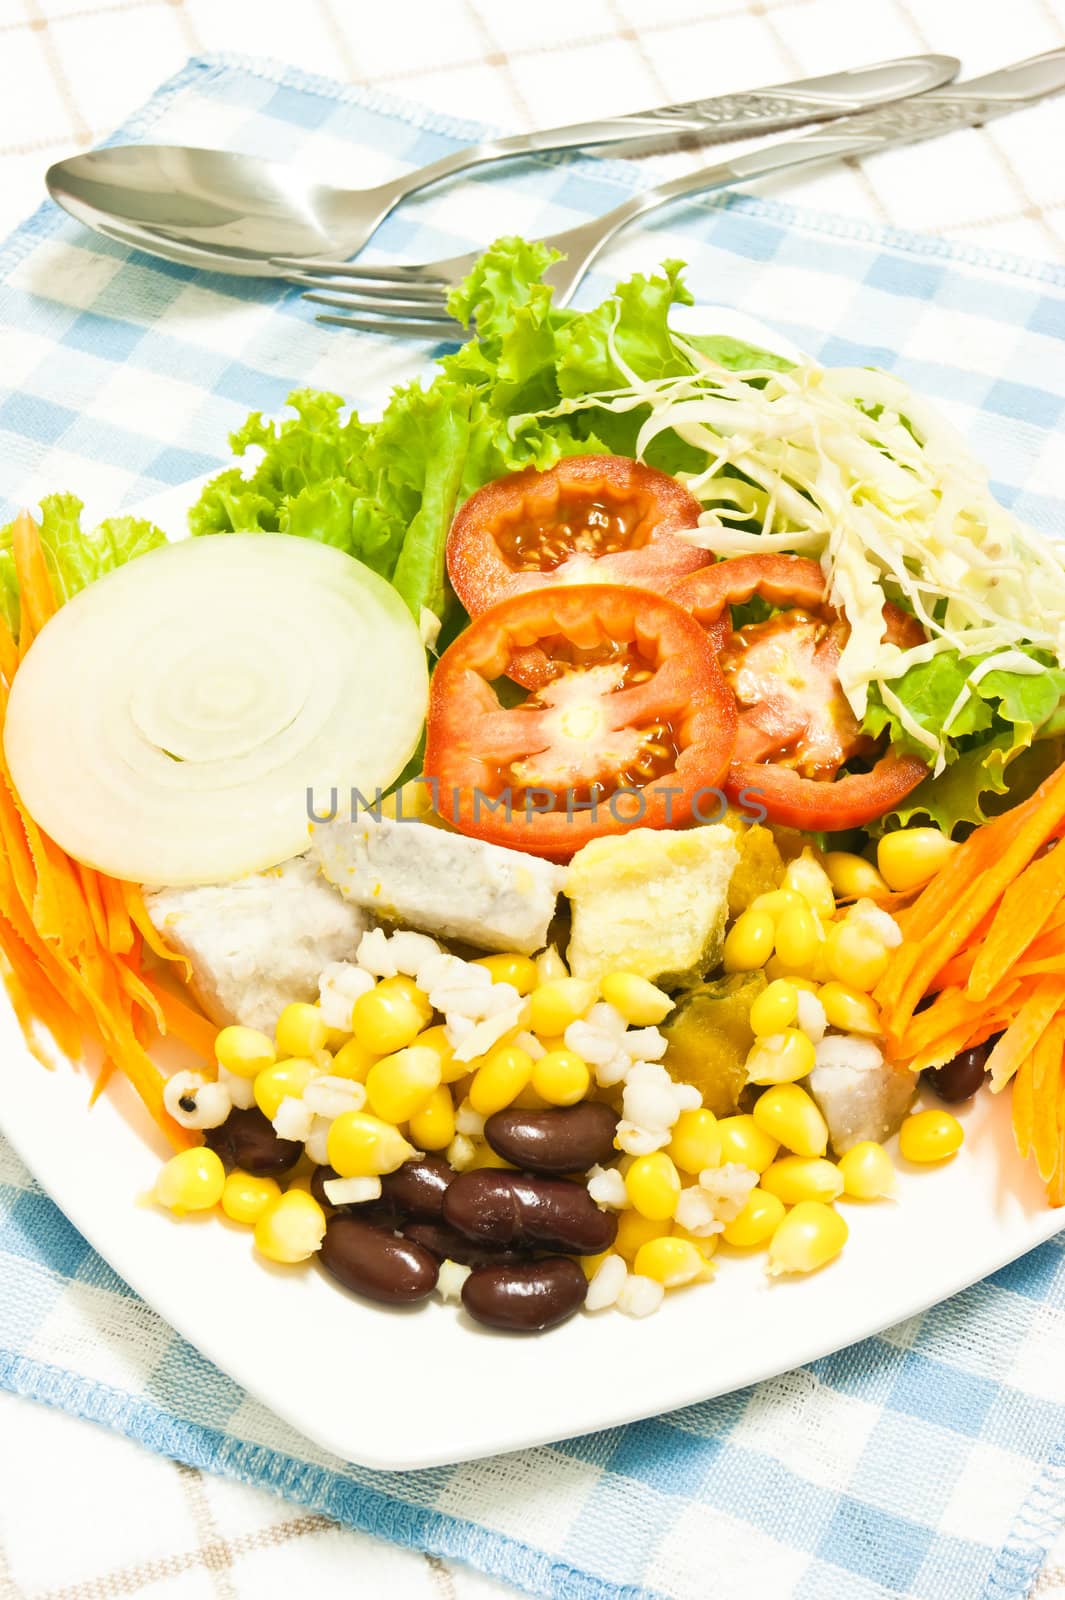 vegetables fresh and cereal is the natural food  for vegetarian